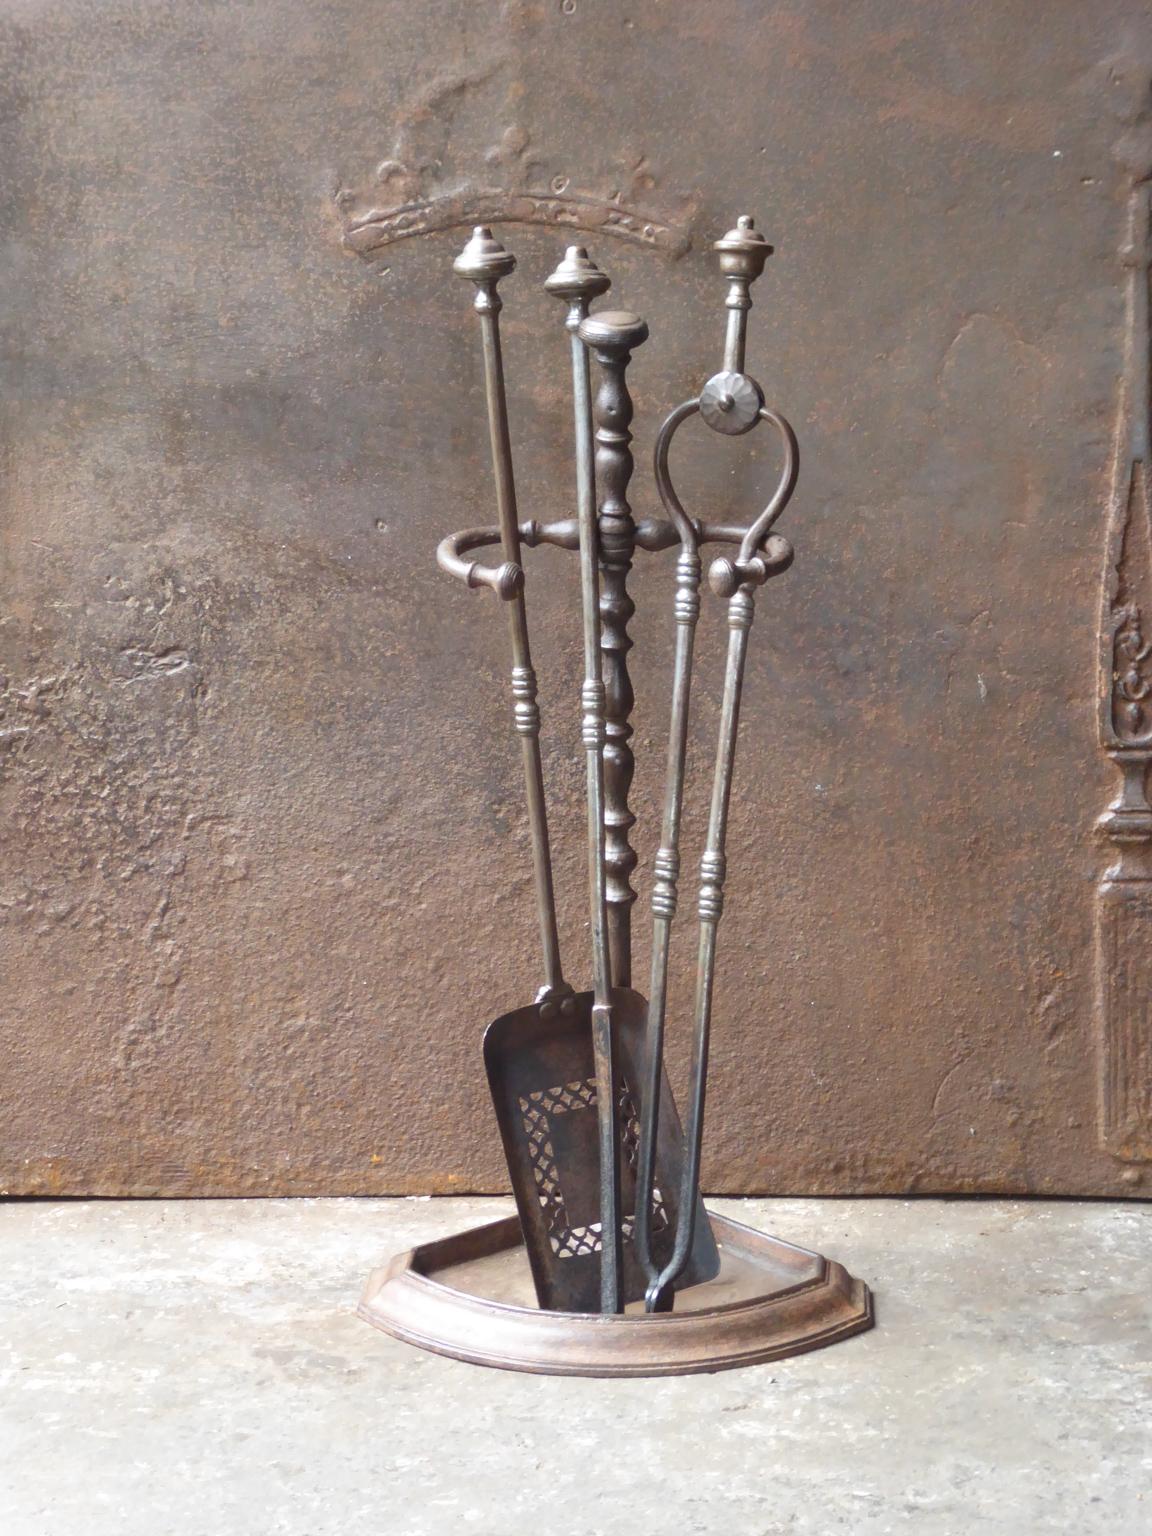 English set of three fireplace tools and a stand, made of wrought iron. The fire tool set is in a good condition and is fully functional. 19th century, Victorian.